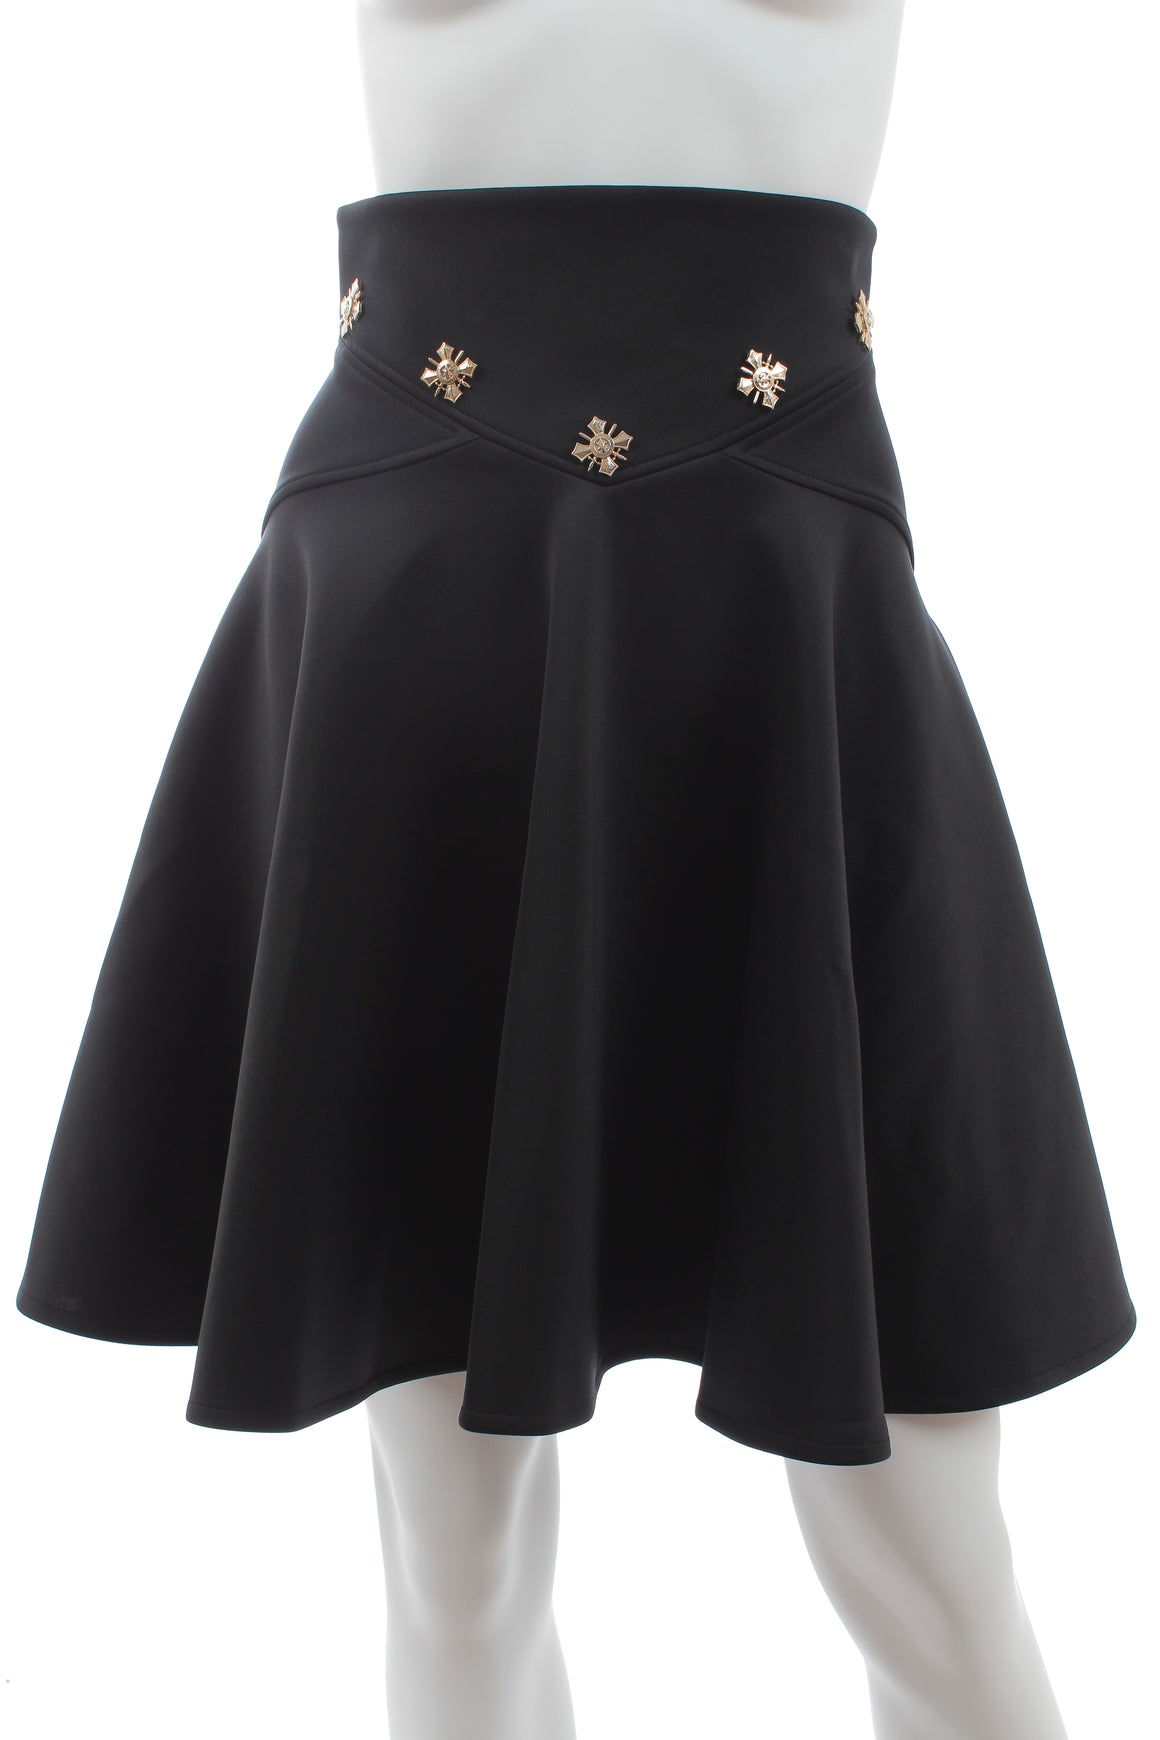 Versace Collection Embellished-Waist Flared Skirt